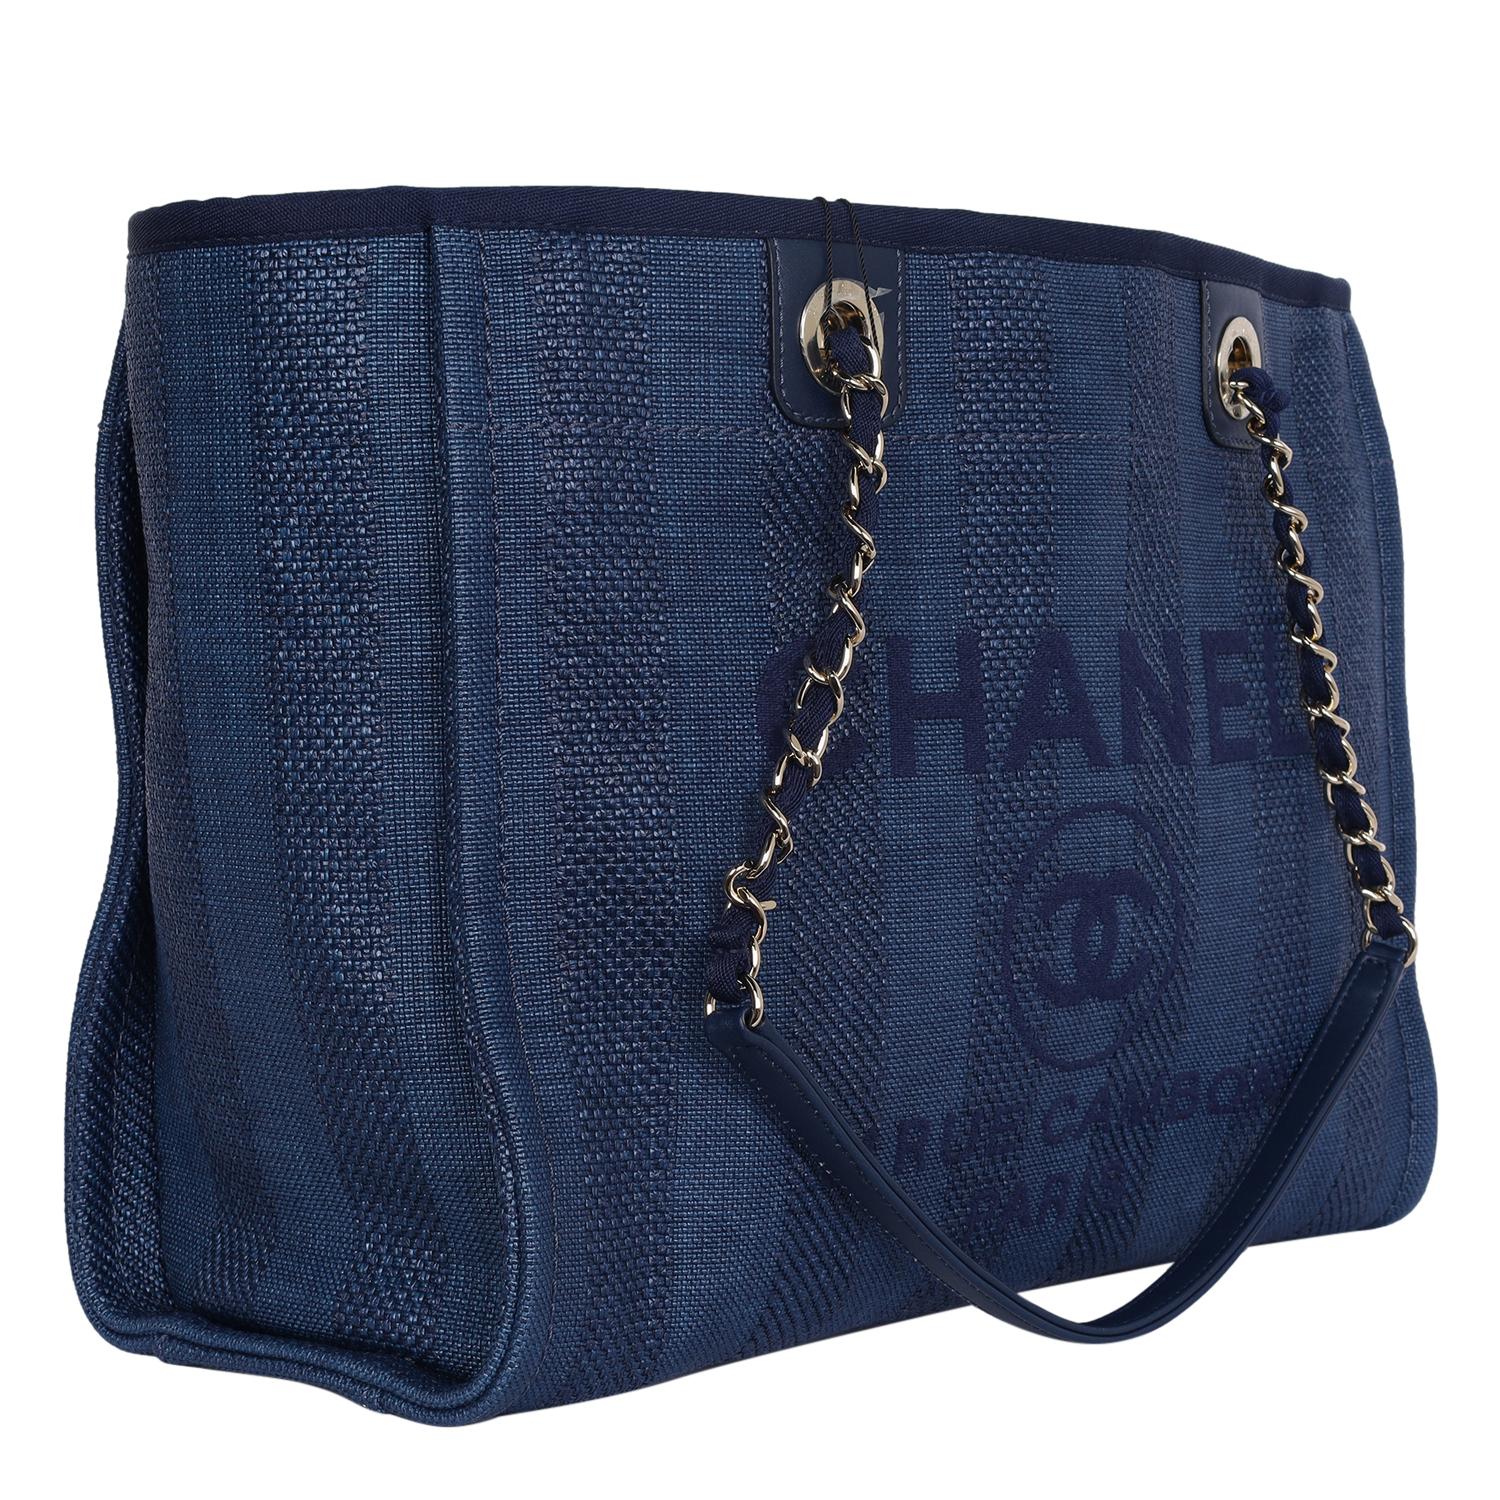 Women's Chanel Blue Striped Mixed Fibers Medium Deauville Shoulder Bag Tote Navy 2019 For Sale